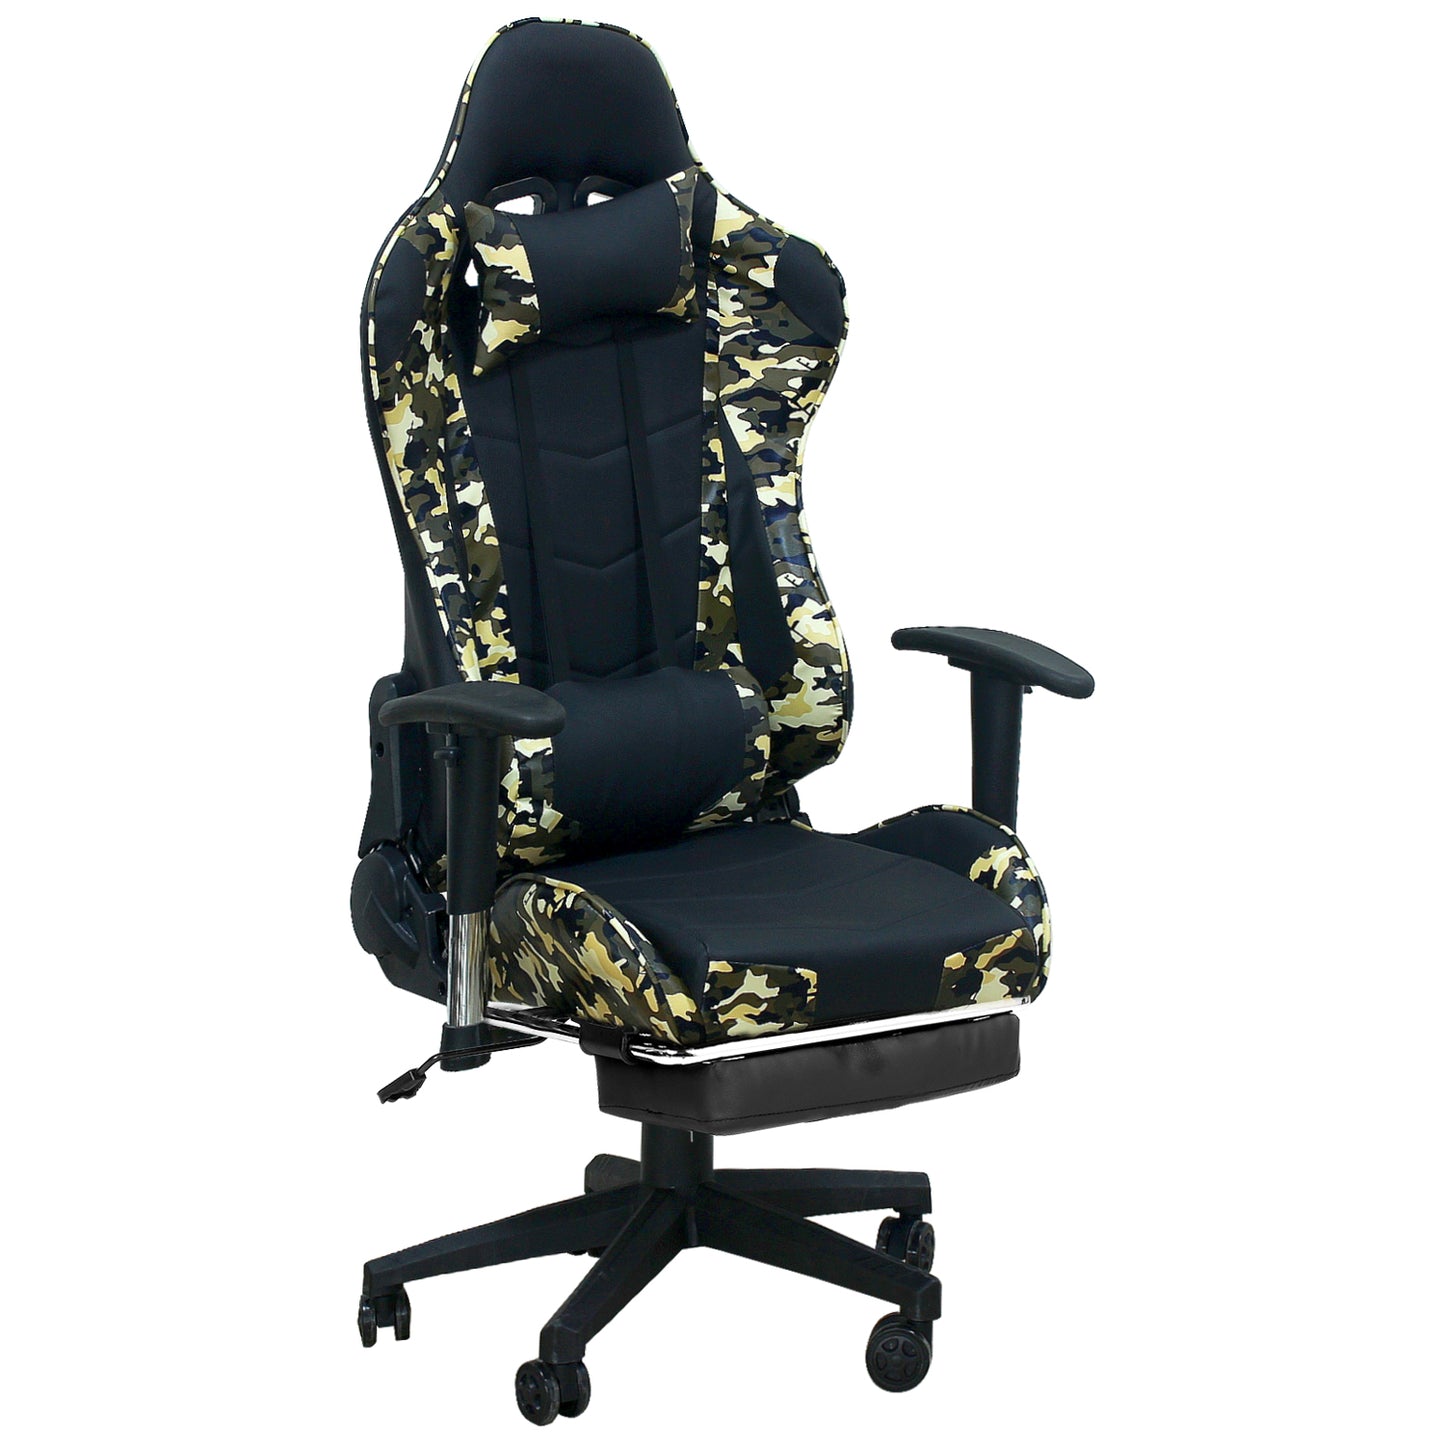 Labradores Computer Office/Game Chair High Back PU Leather with Footrest and Lumbar Cushion and Headrest